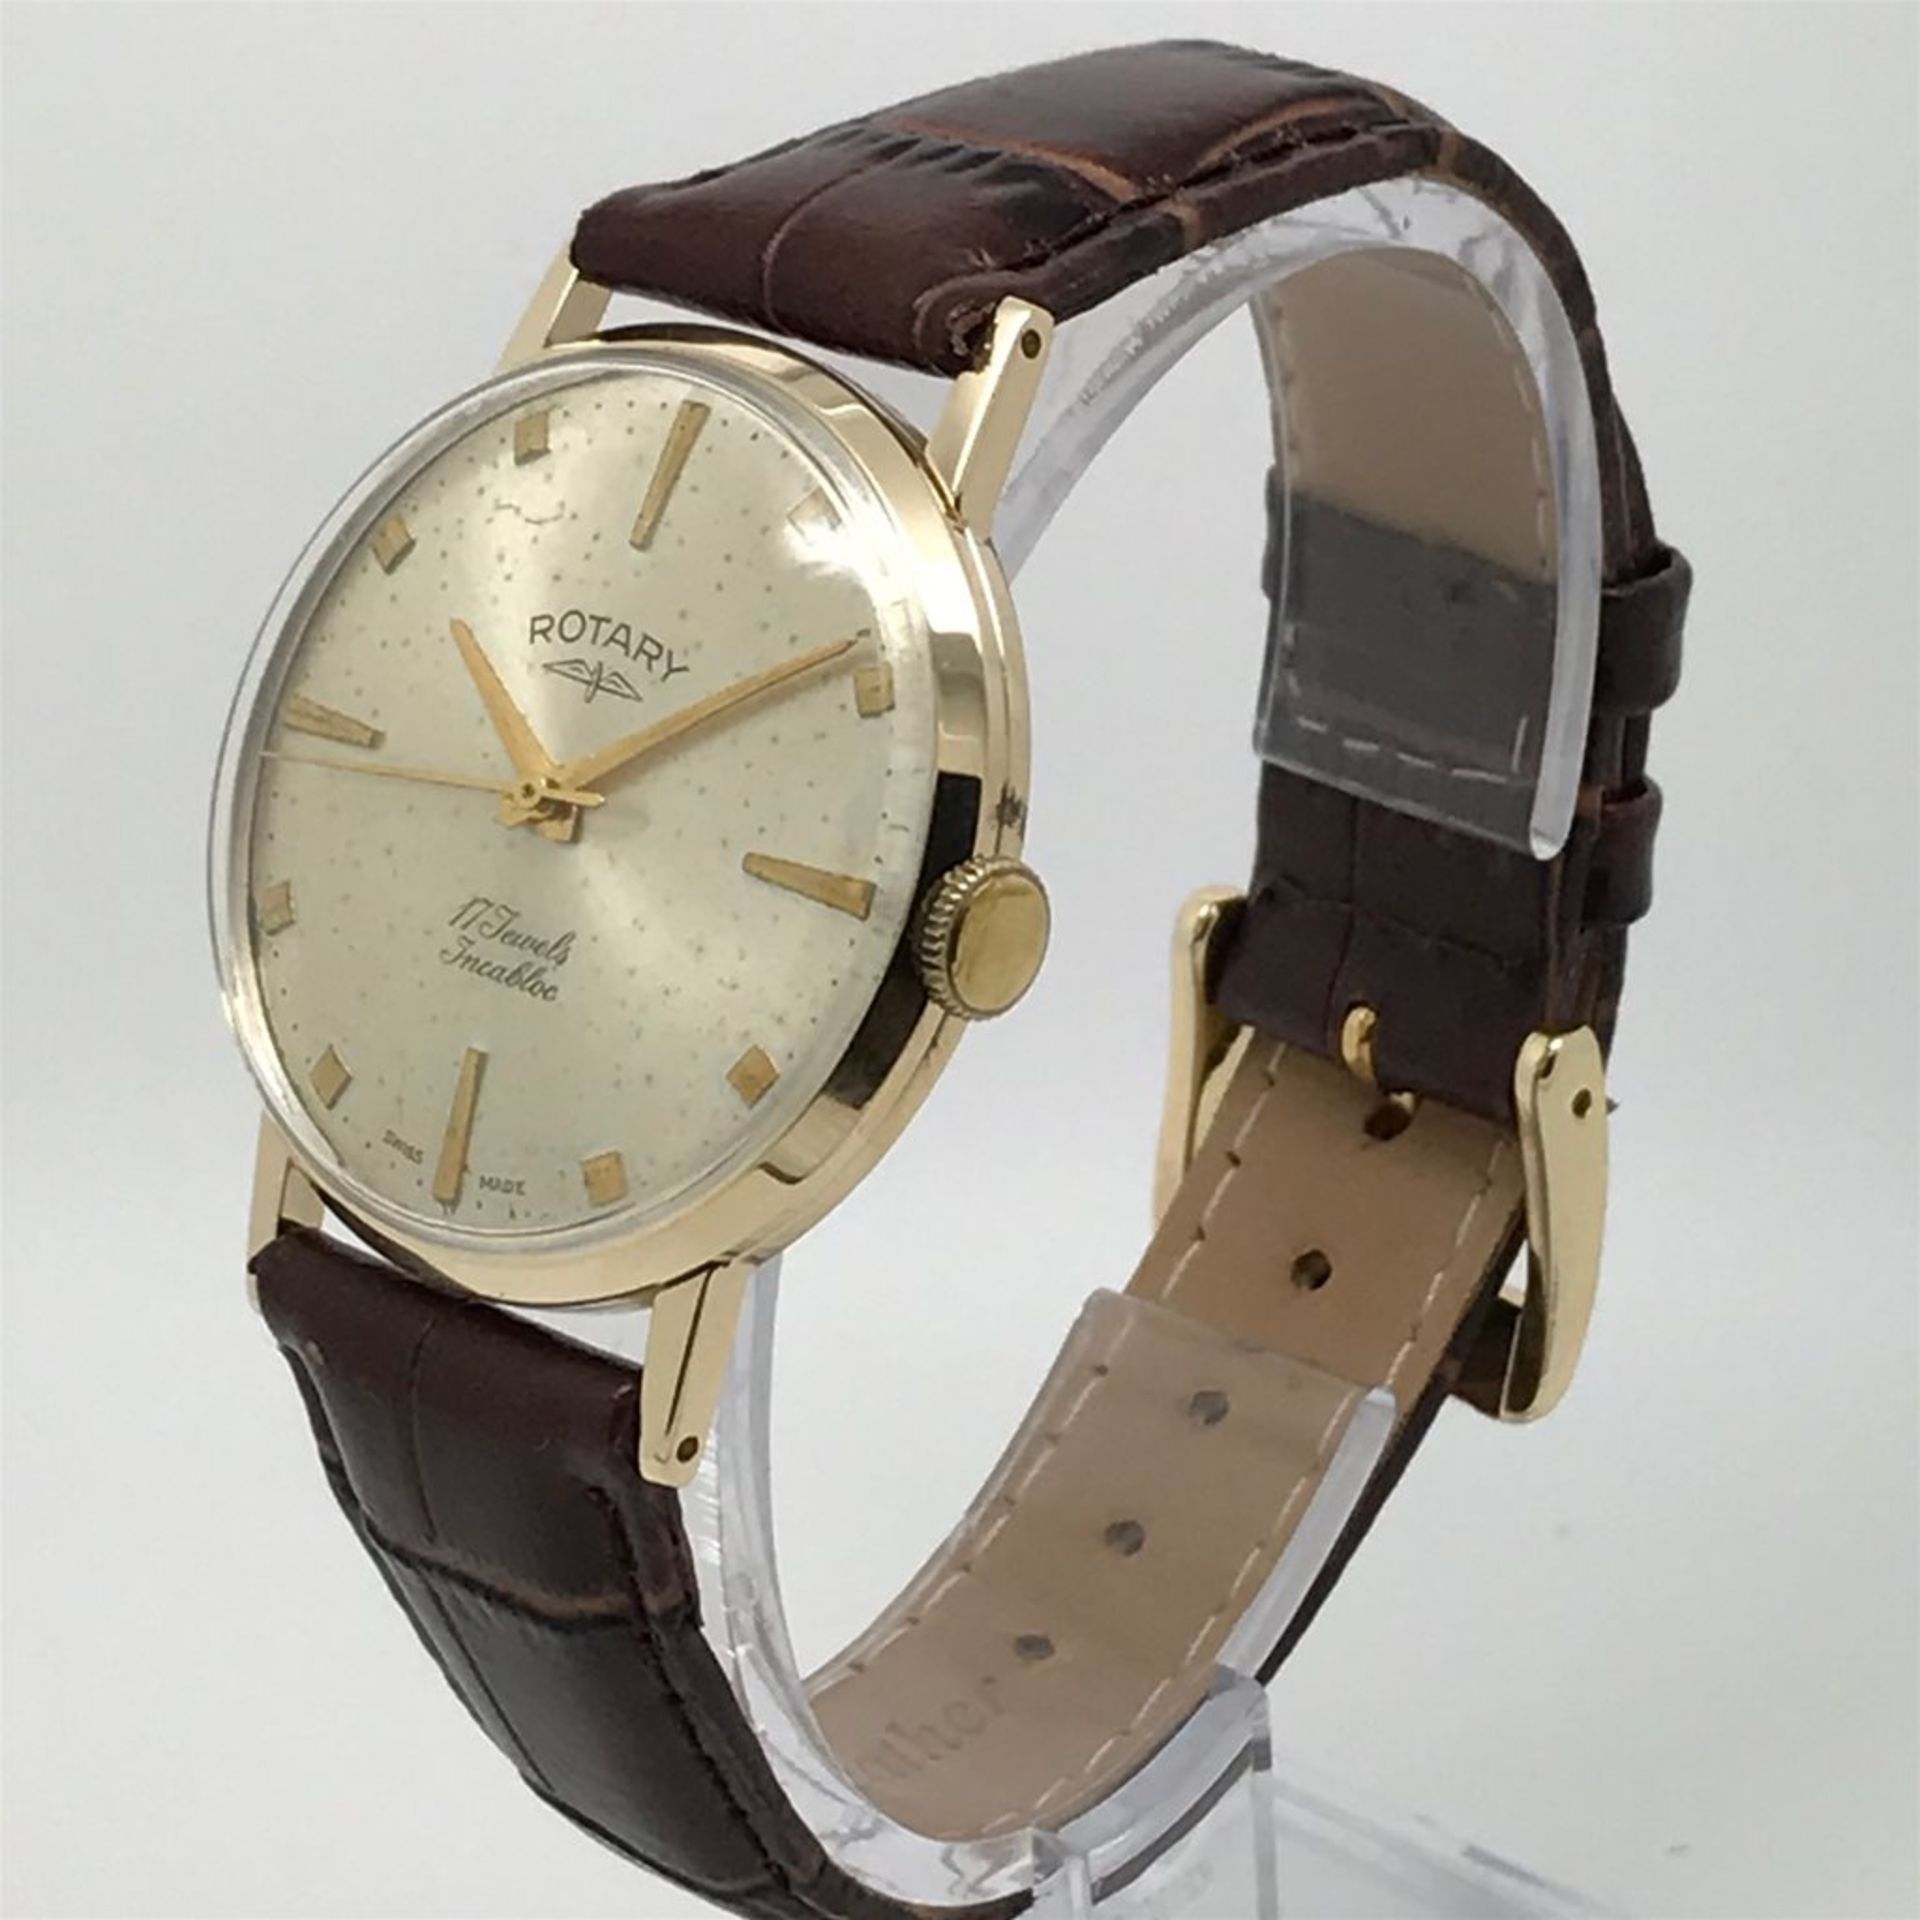 ROTARY Vintage 9ct Gold Mens Watch, Manual Wind - Image 2 of 5